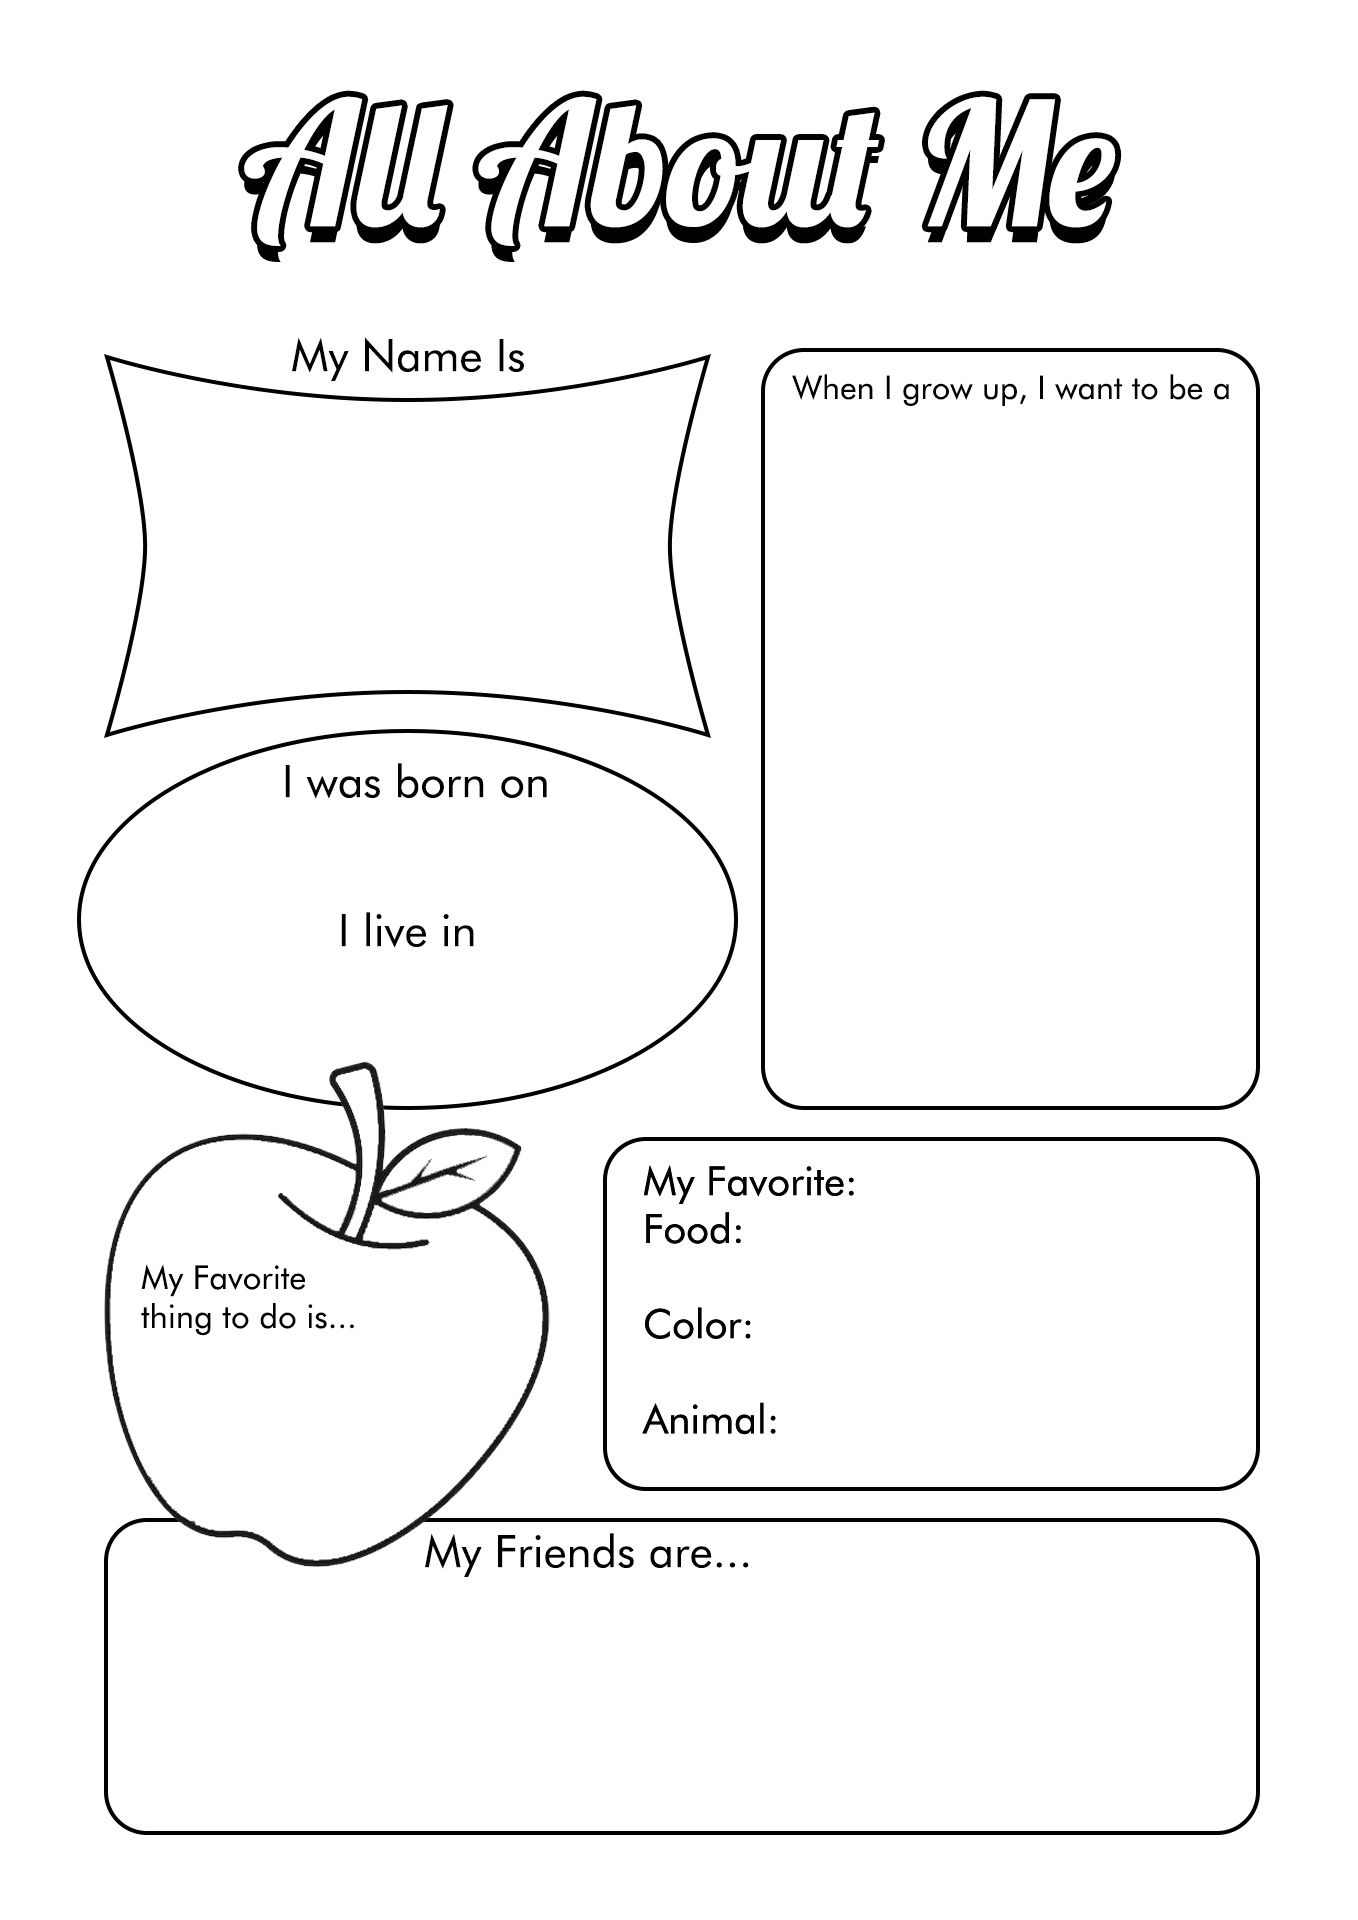 All About Me Student Worksheet Image